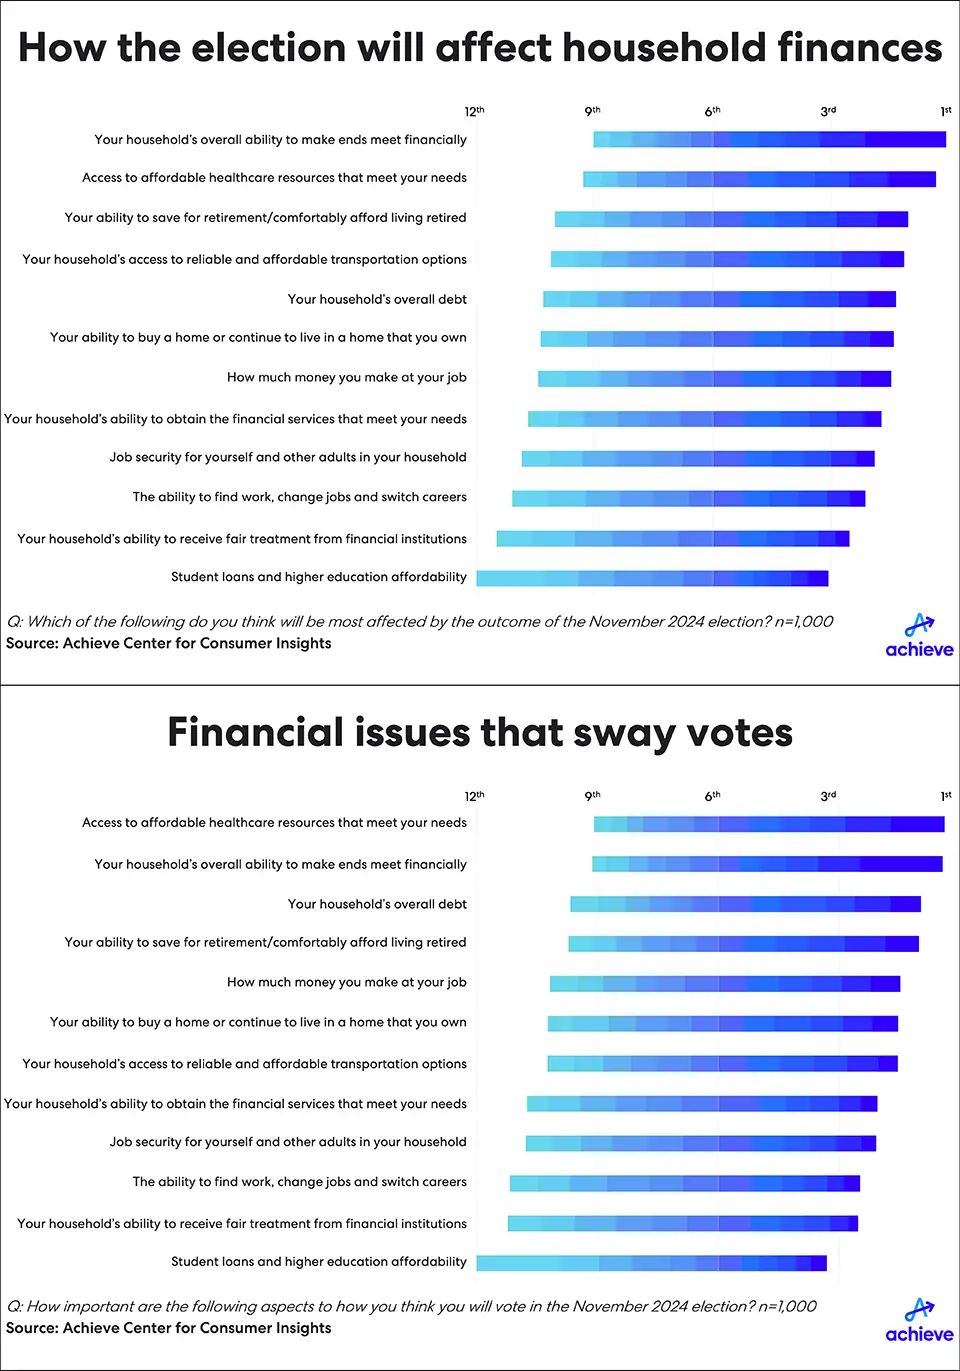 achieve-election-tracker-1q24-charts-1-2-final-small.png